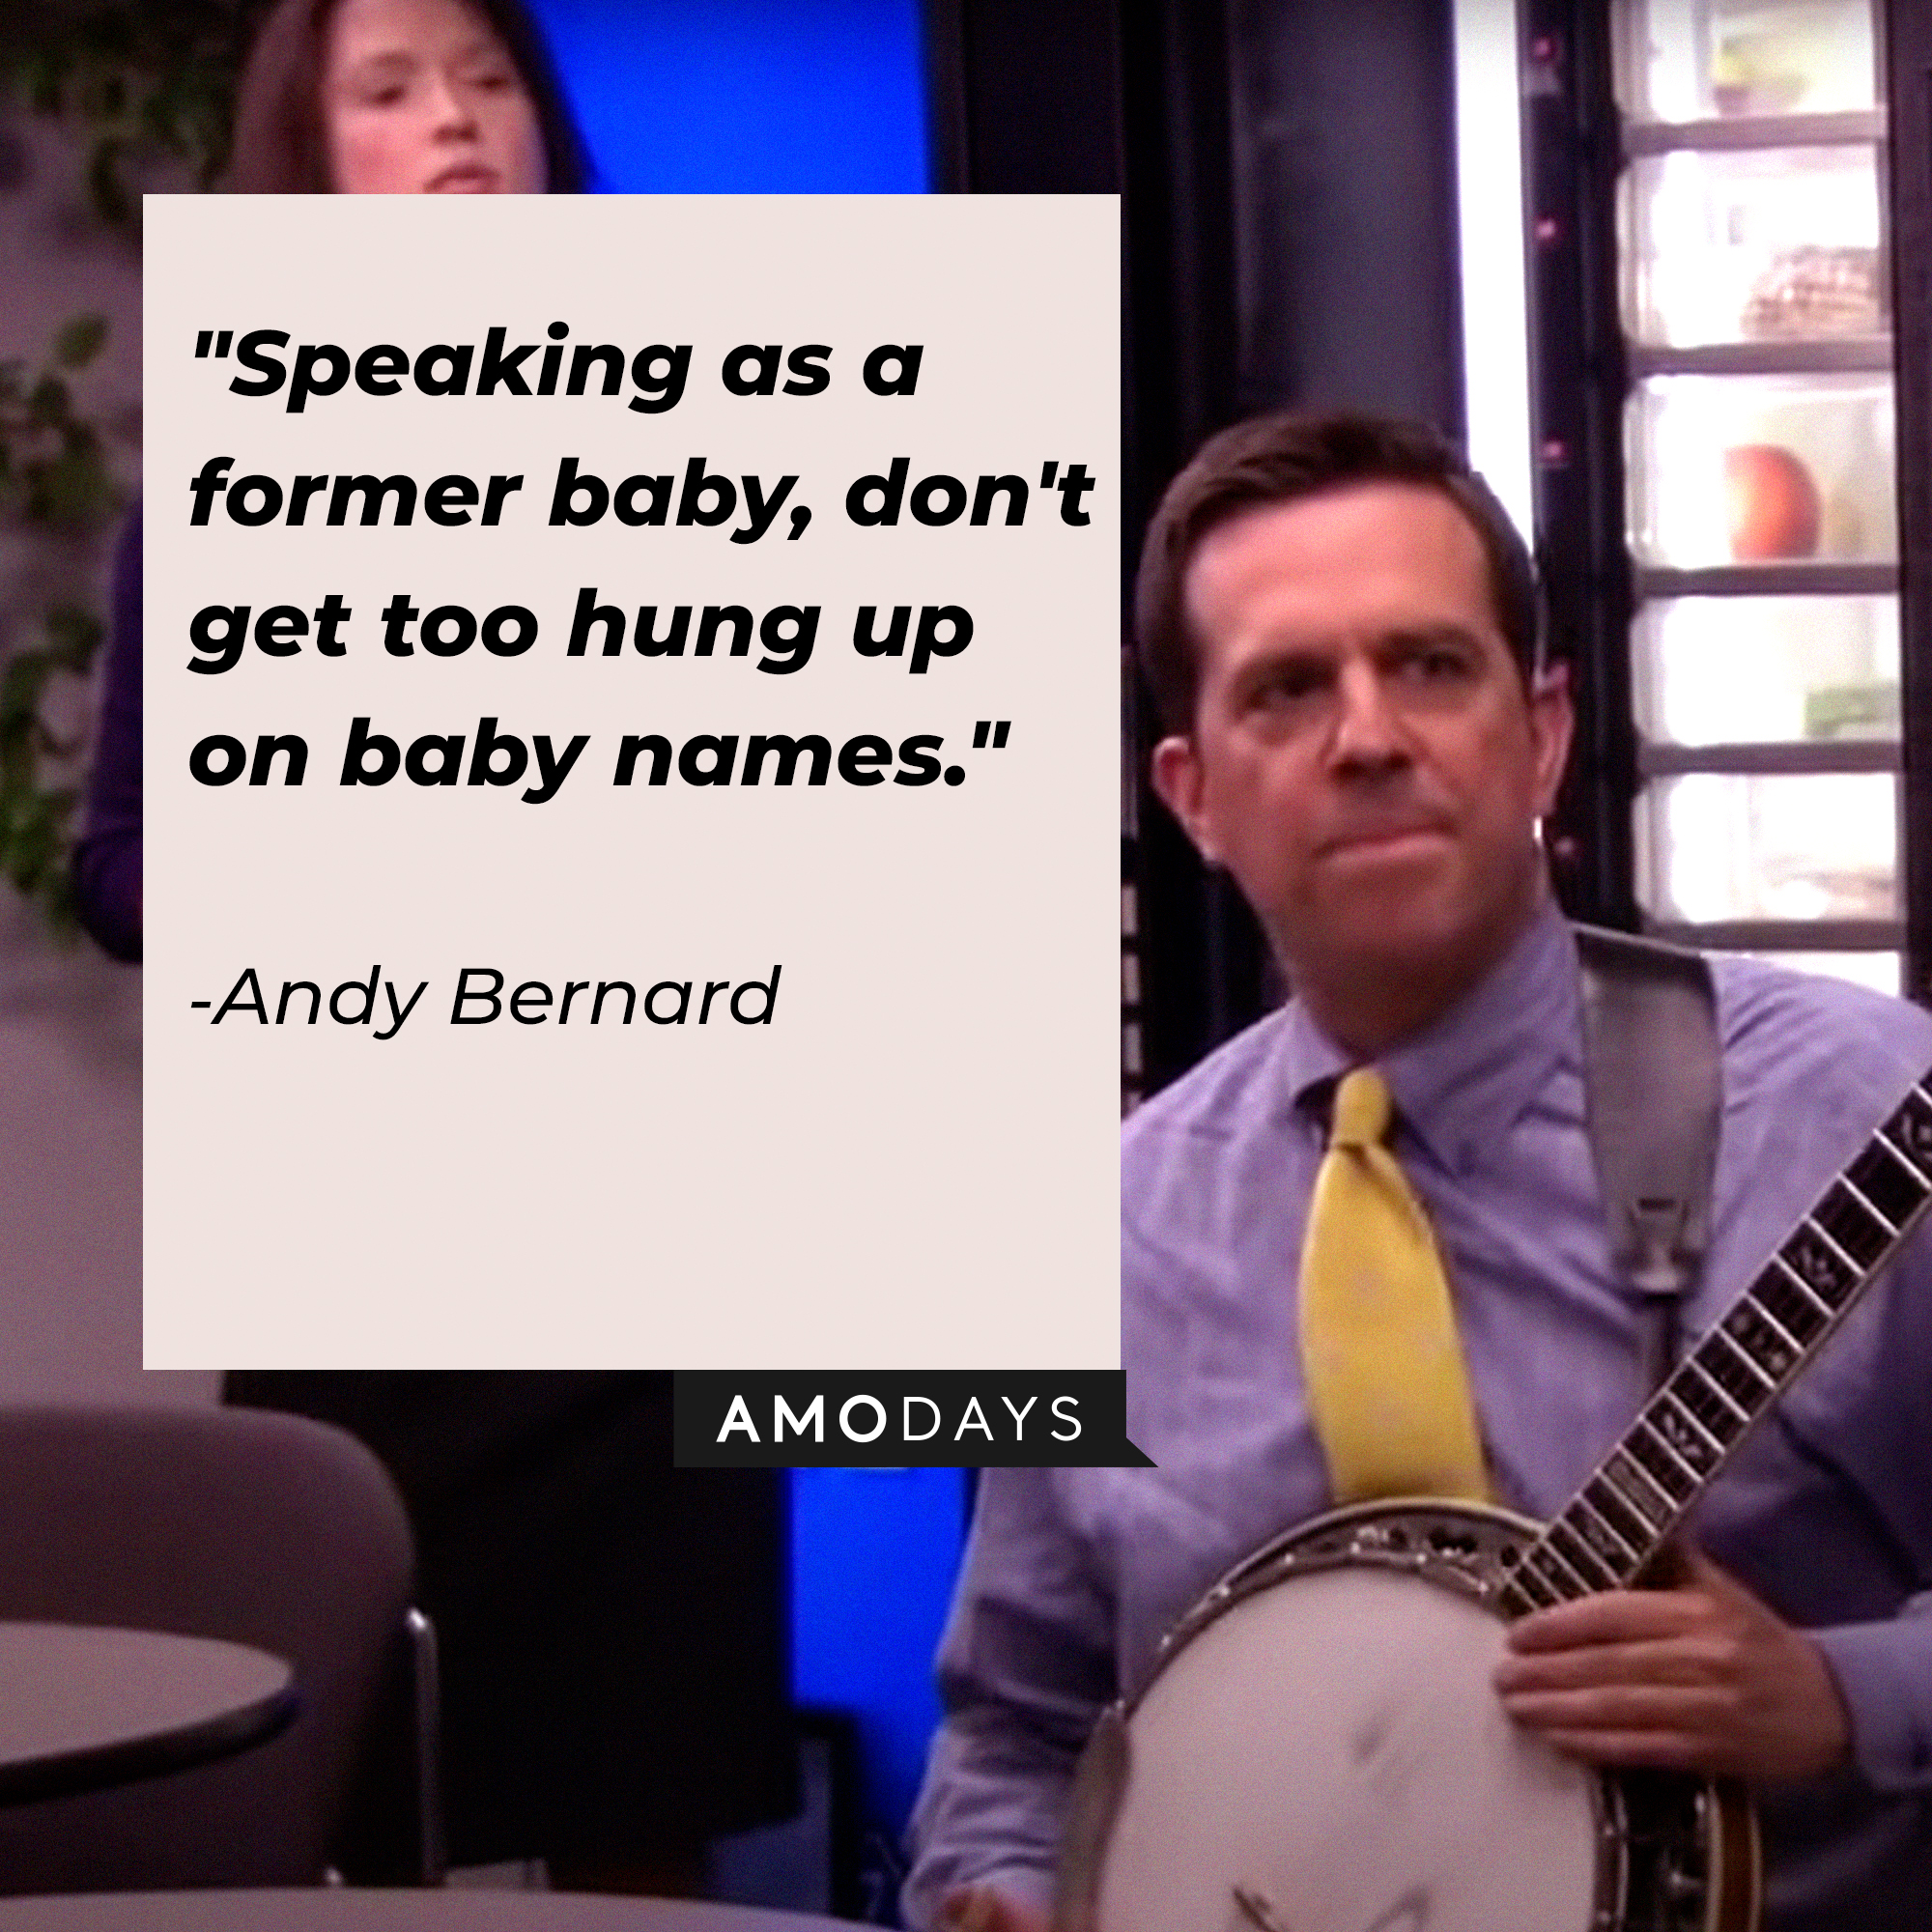 Andy Bernard, with his quote: “Speaking as a former baby, don't get too hung up on baby names." │ Source: youtube.com/TheOffice